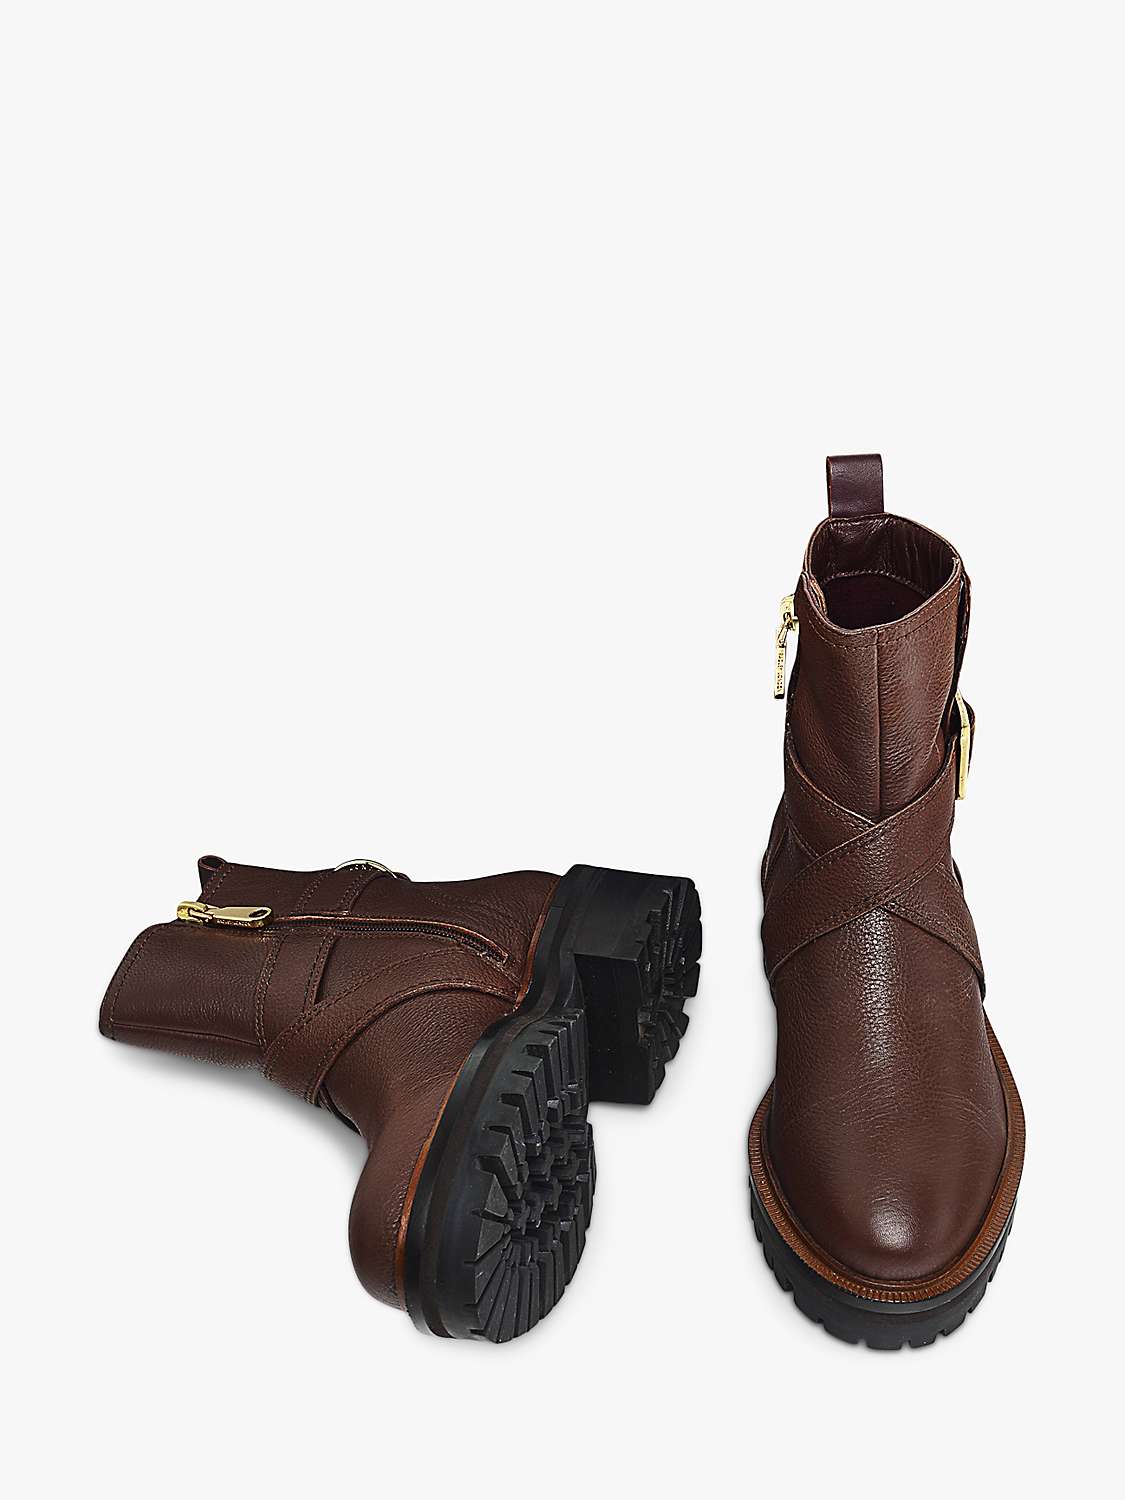 Buy Radley Buckleberry Lane Chunky Buckle Boots Online at johnlewis.com